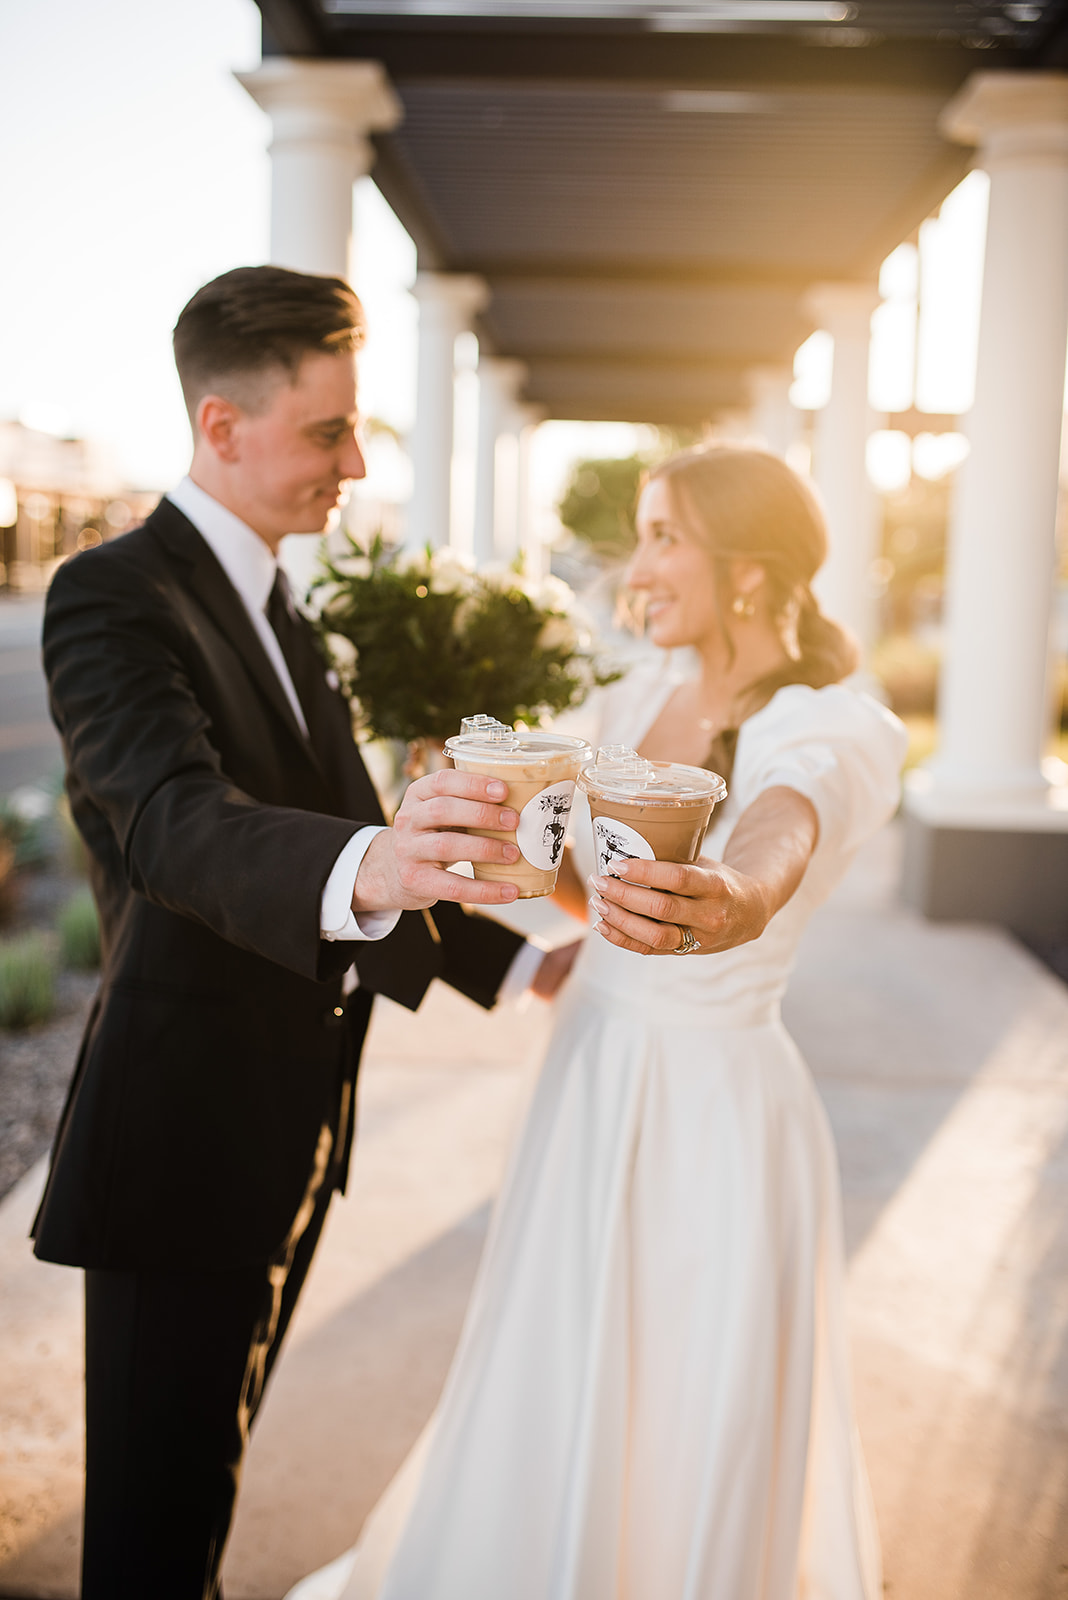 Newlyweds show off their coffee cups while standing under a covered walkway at sunset prepared by Phoenix Wedding Planners